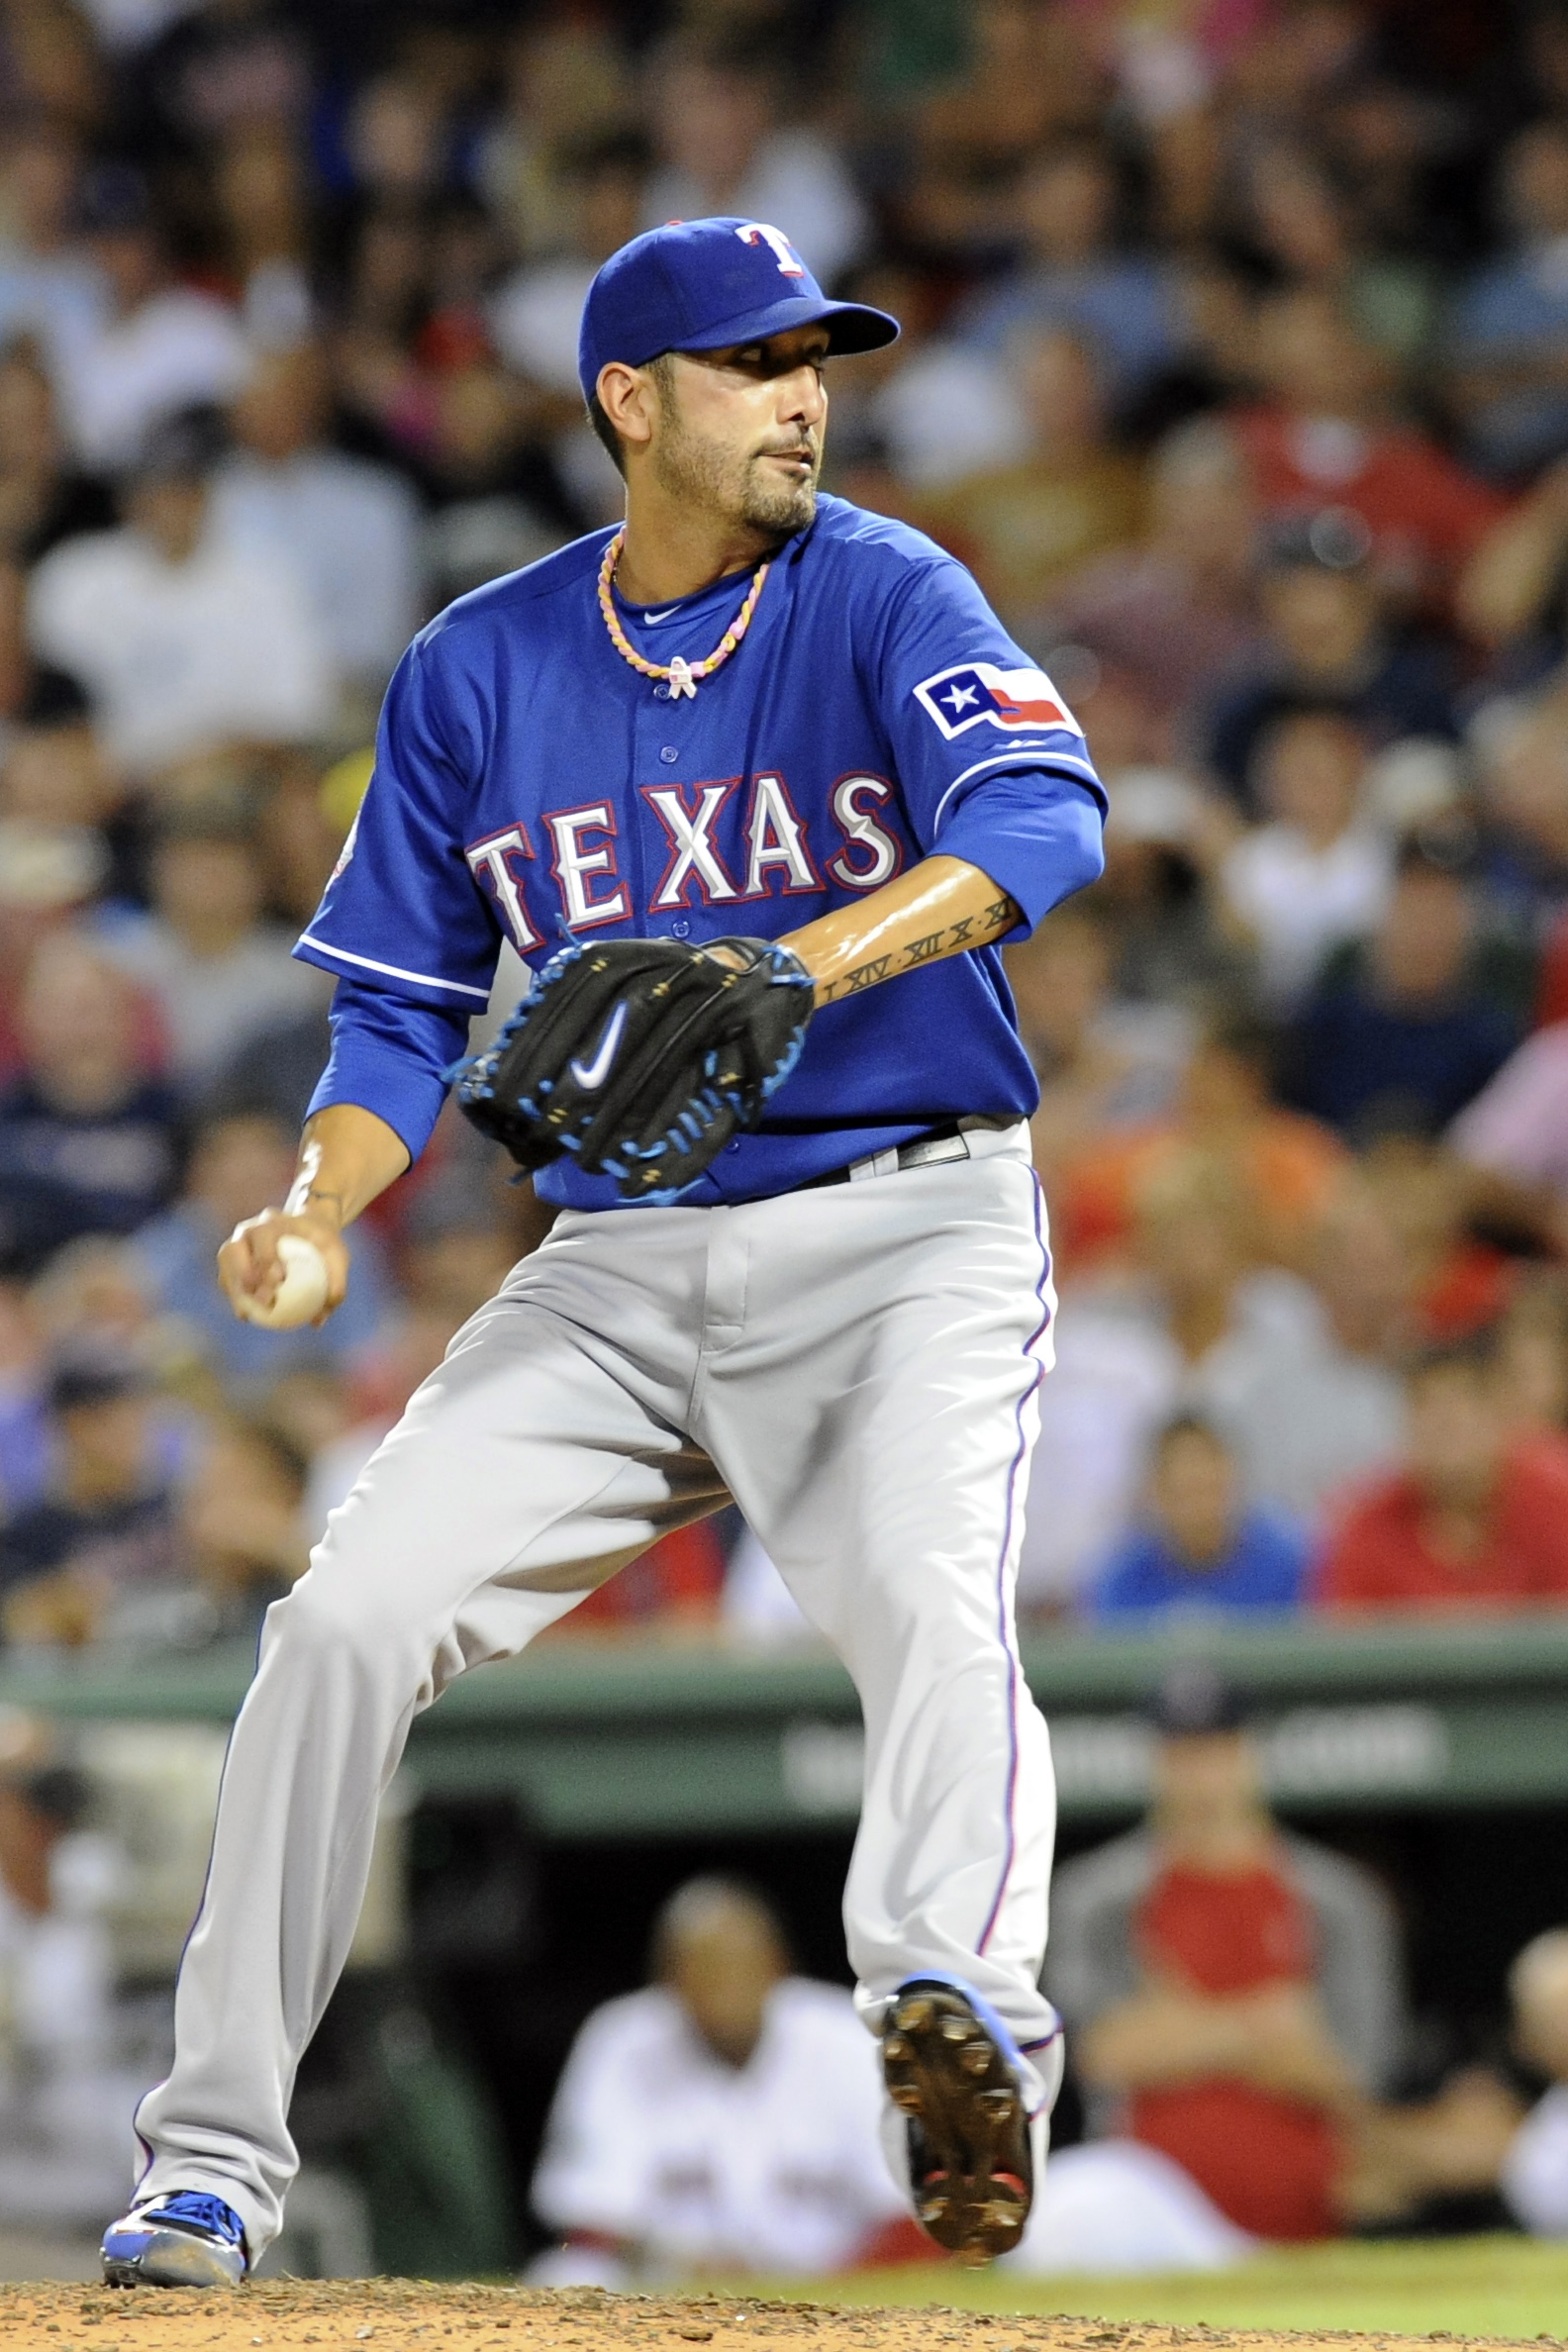 Phillies acquire Michael Young from Texas Rangers